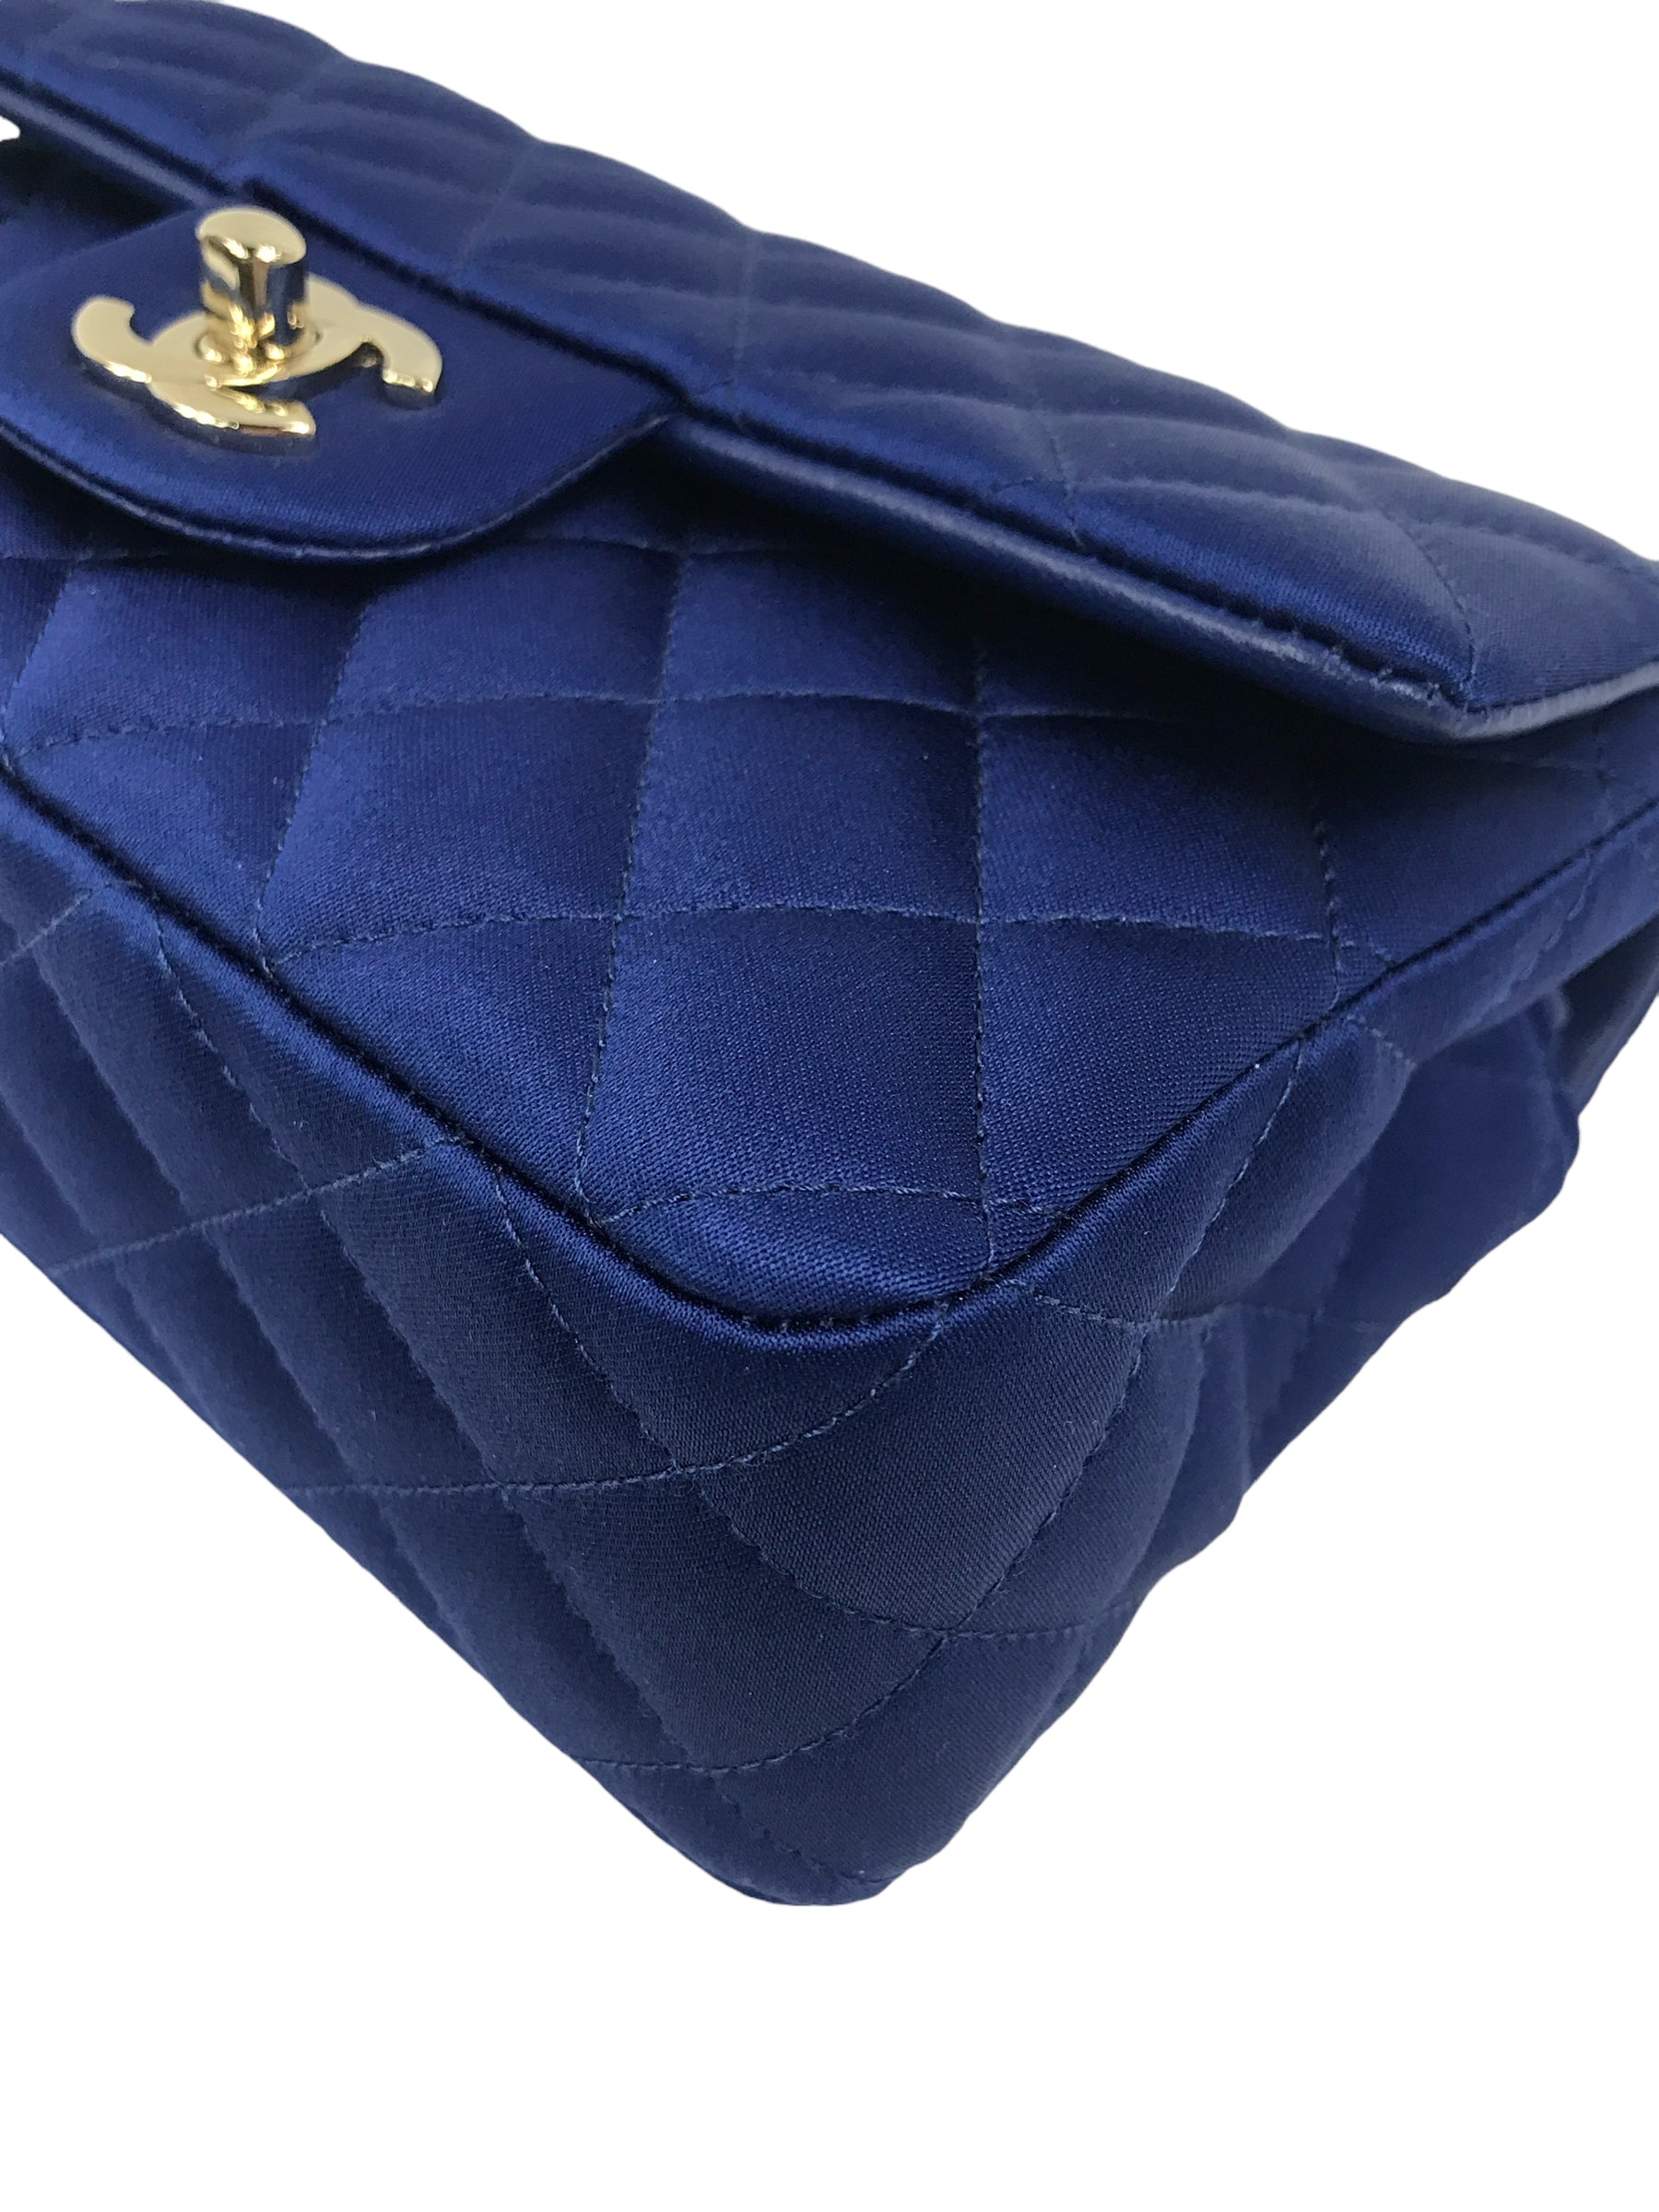 Blue Satin Silk Quilted Single Flap Mini Rectangle w/GHW